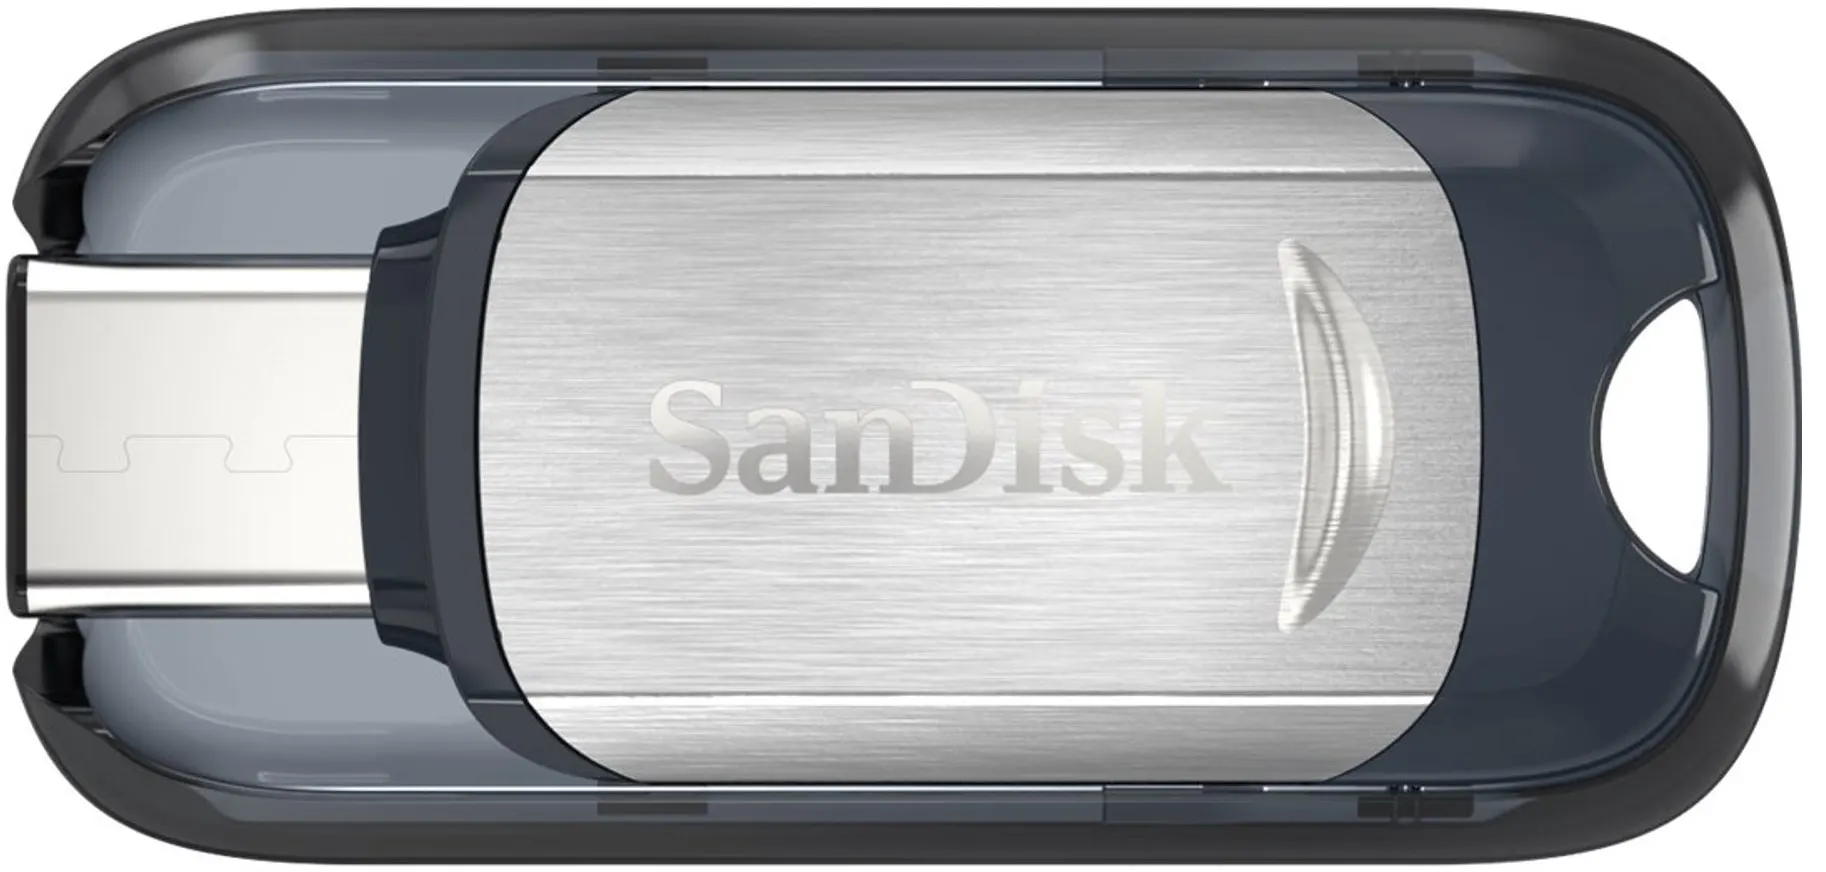 SanDisk Ultra Flash Memory, 32GB, Type-C, Silver, SDCZ450-032G-G46